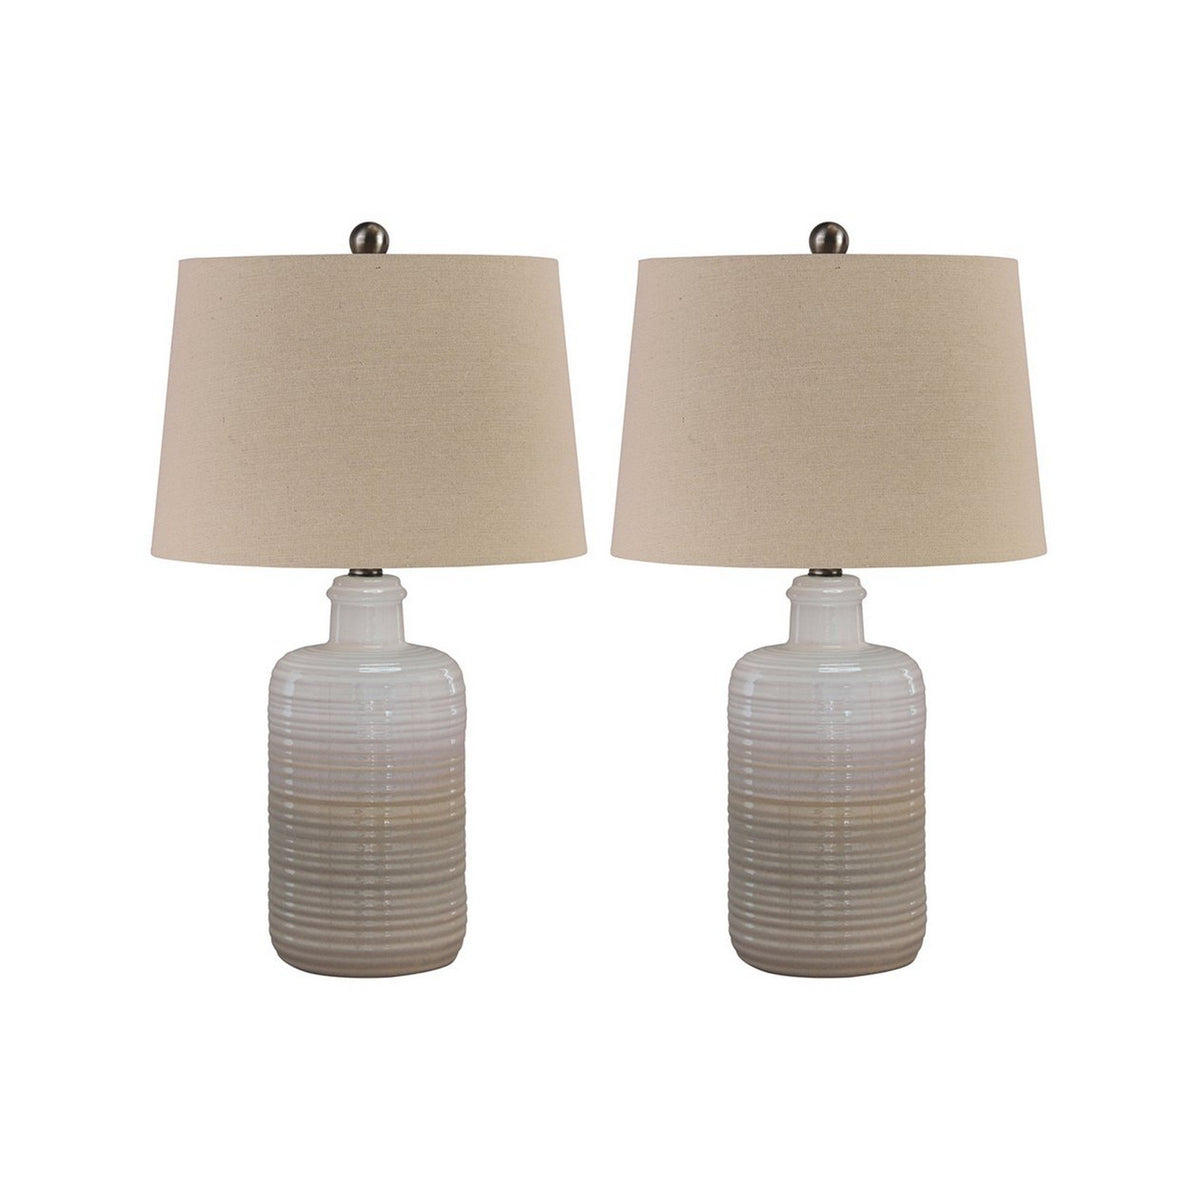 Ceramic Body Table Lamp with Brushed Details, Set of 2, Beige and White - BM227188